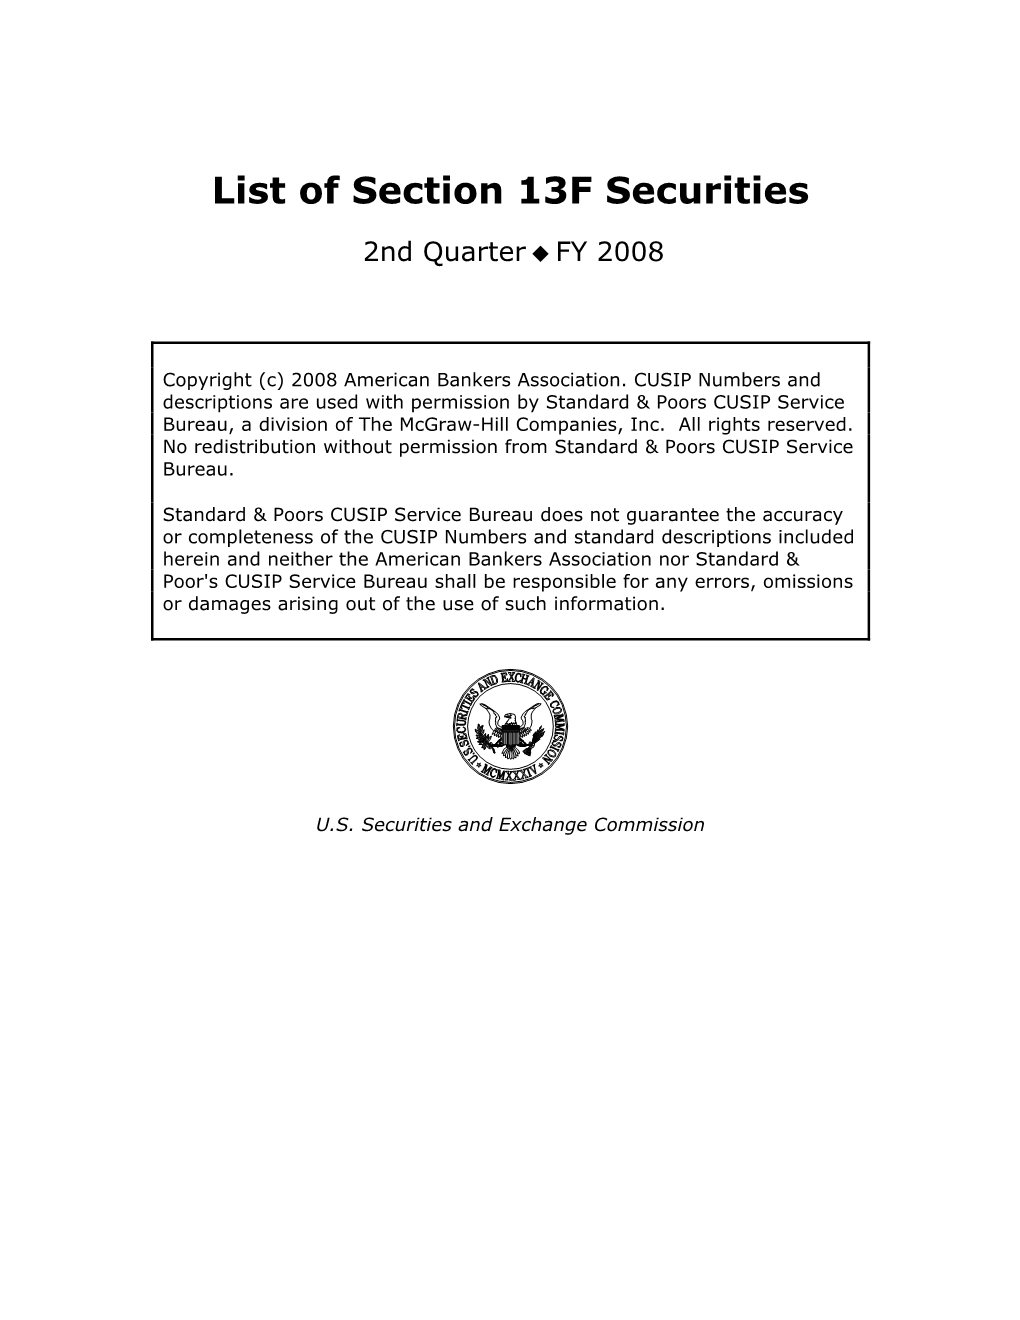 List of Section 13F Securities, Second Quarter 2008